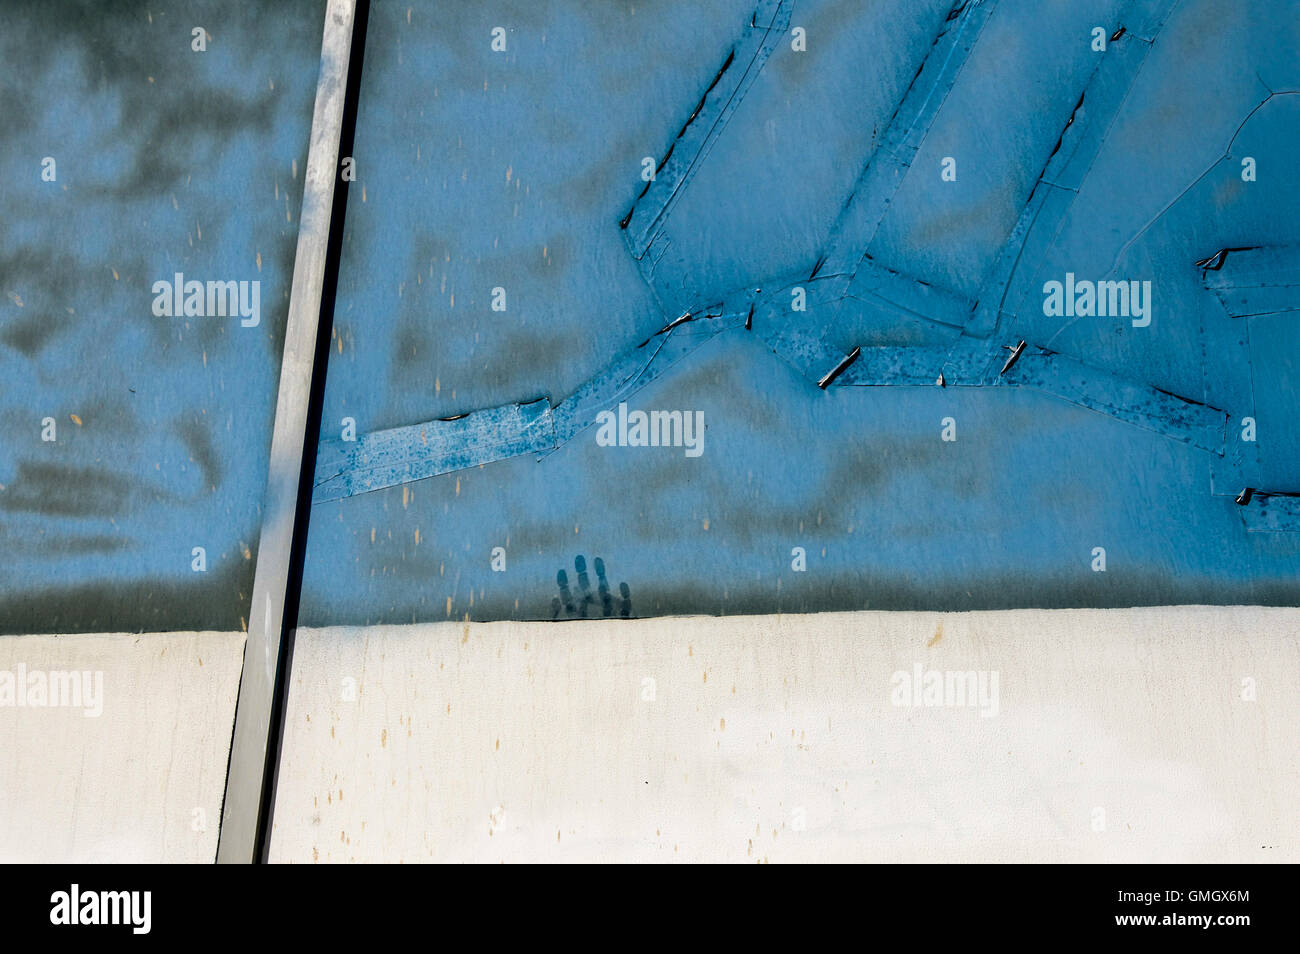 An image of a hand print on an abstract blue background, as if sinking or rising Stock Photo